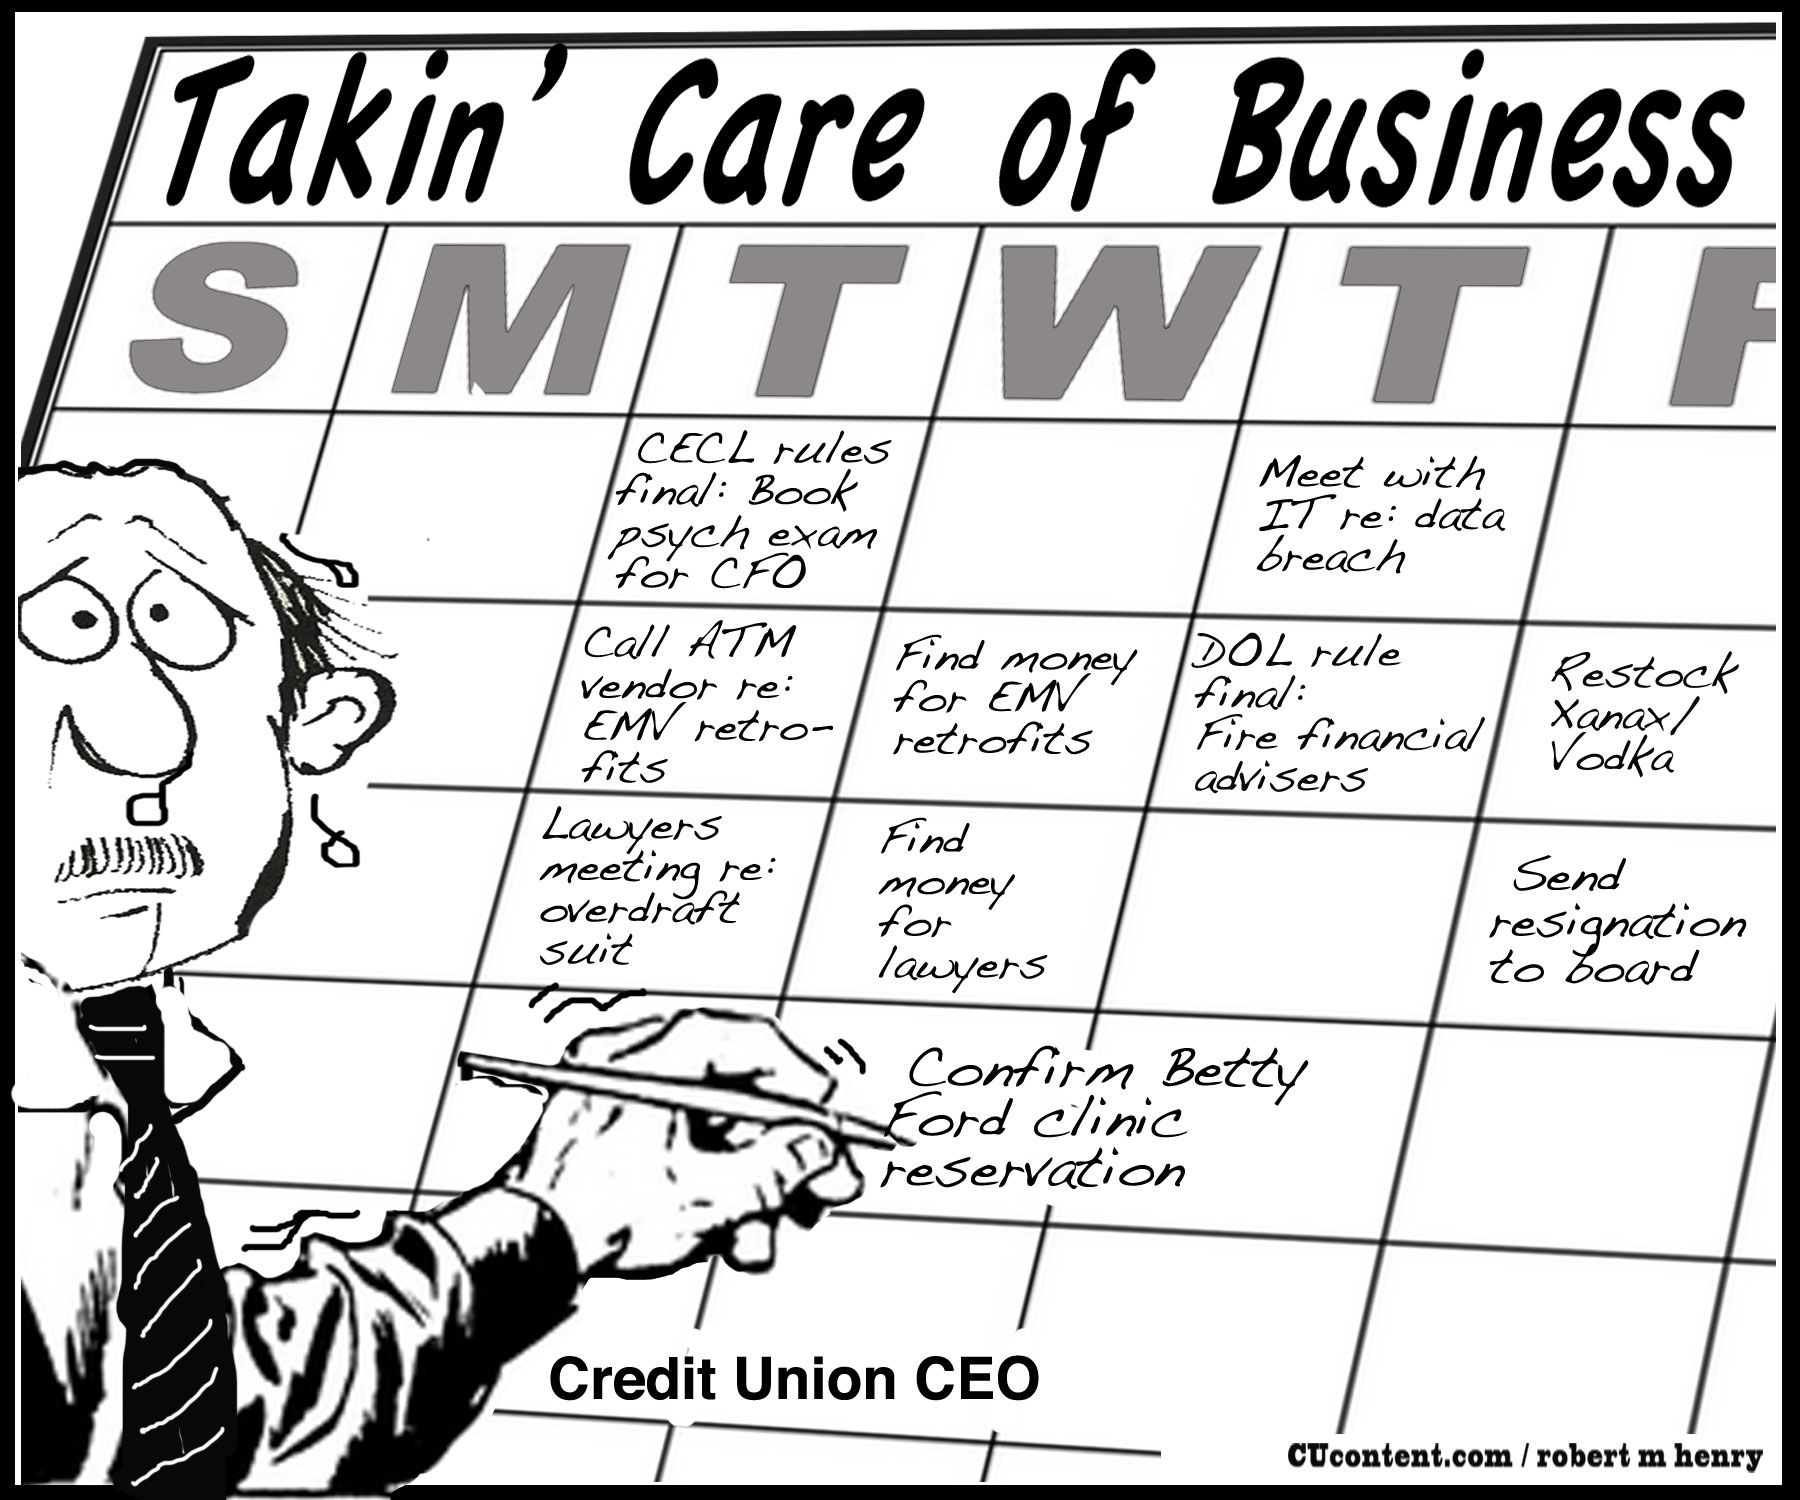 Takin' Care of Business: Editorial Cartoon | Credit Union Times